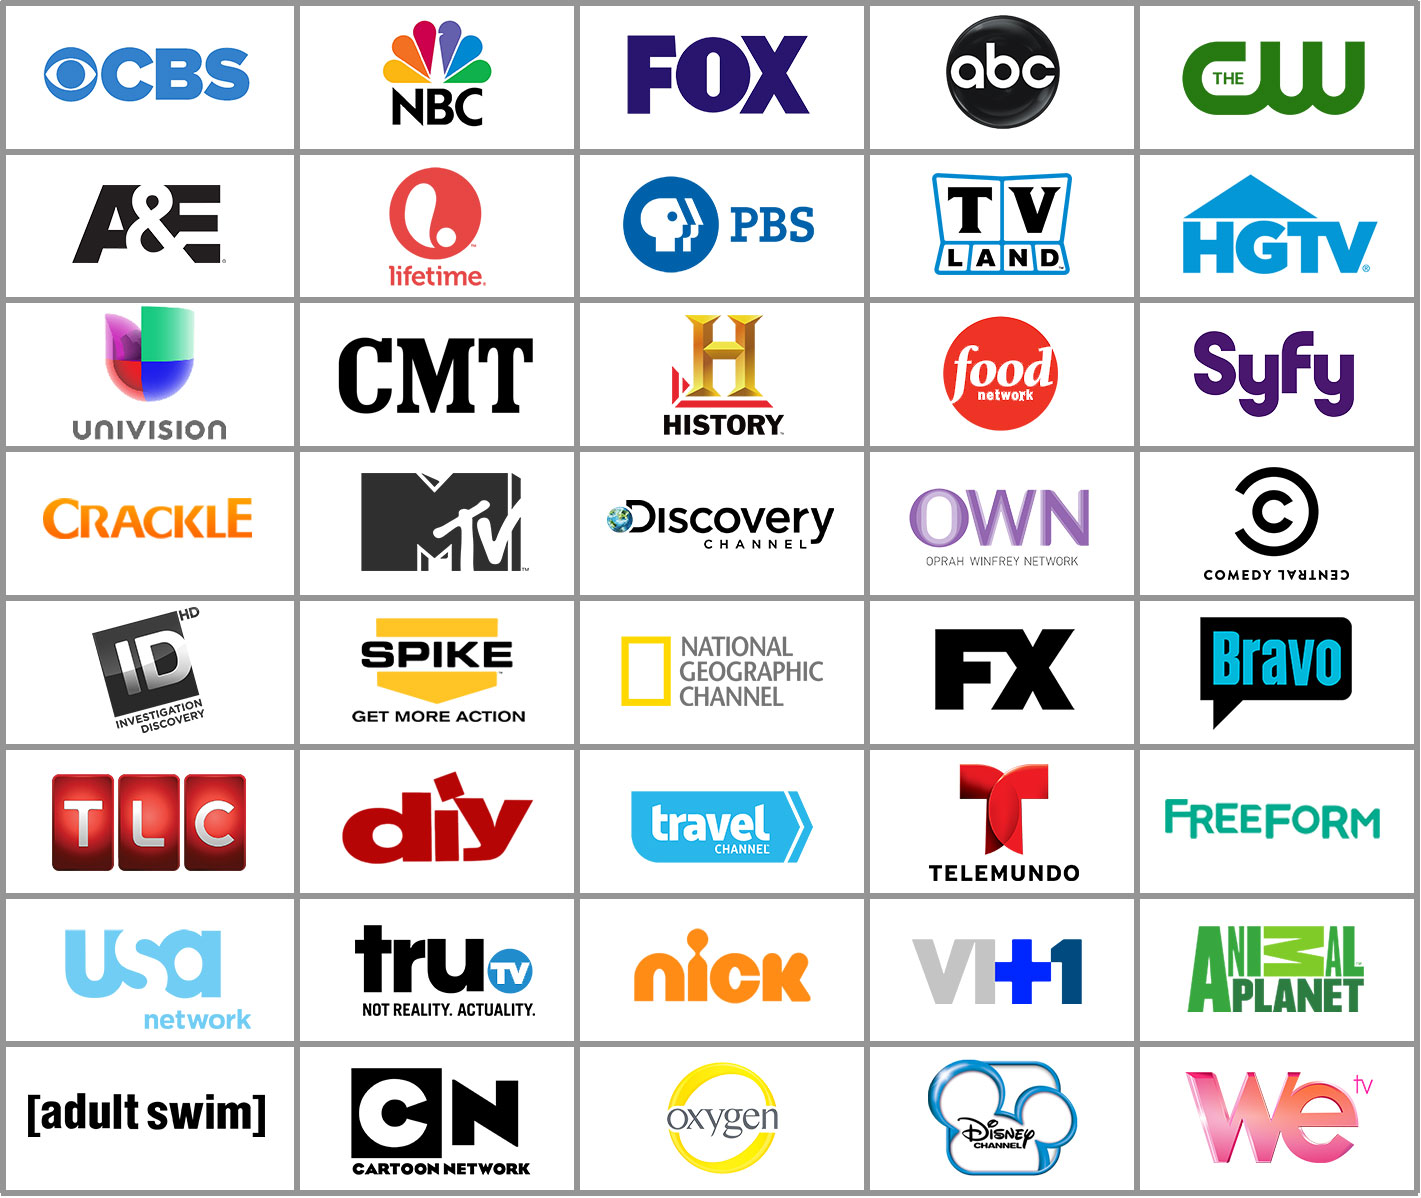 View the directv channel guide and lineup, including hd channels by package...